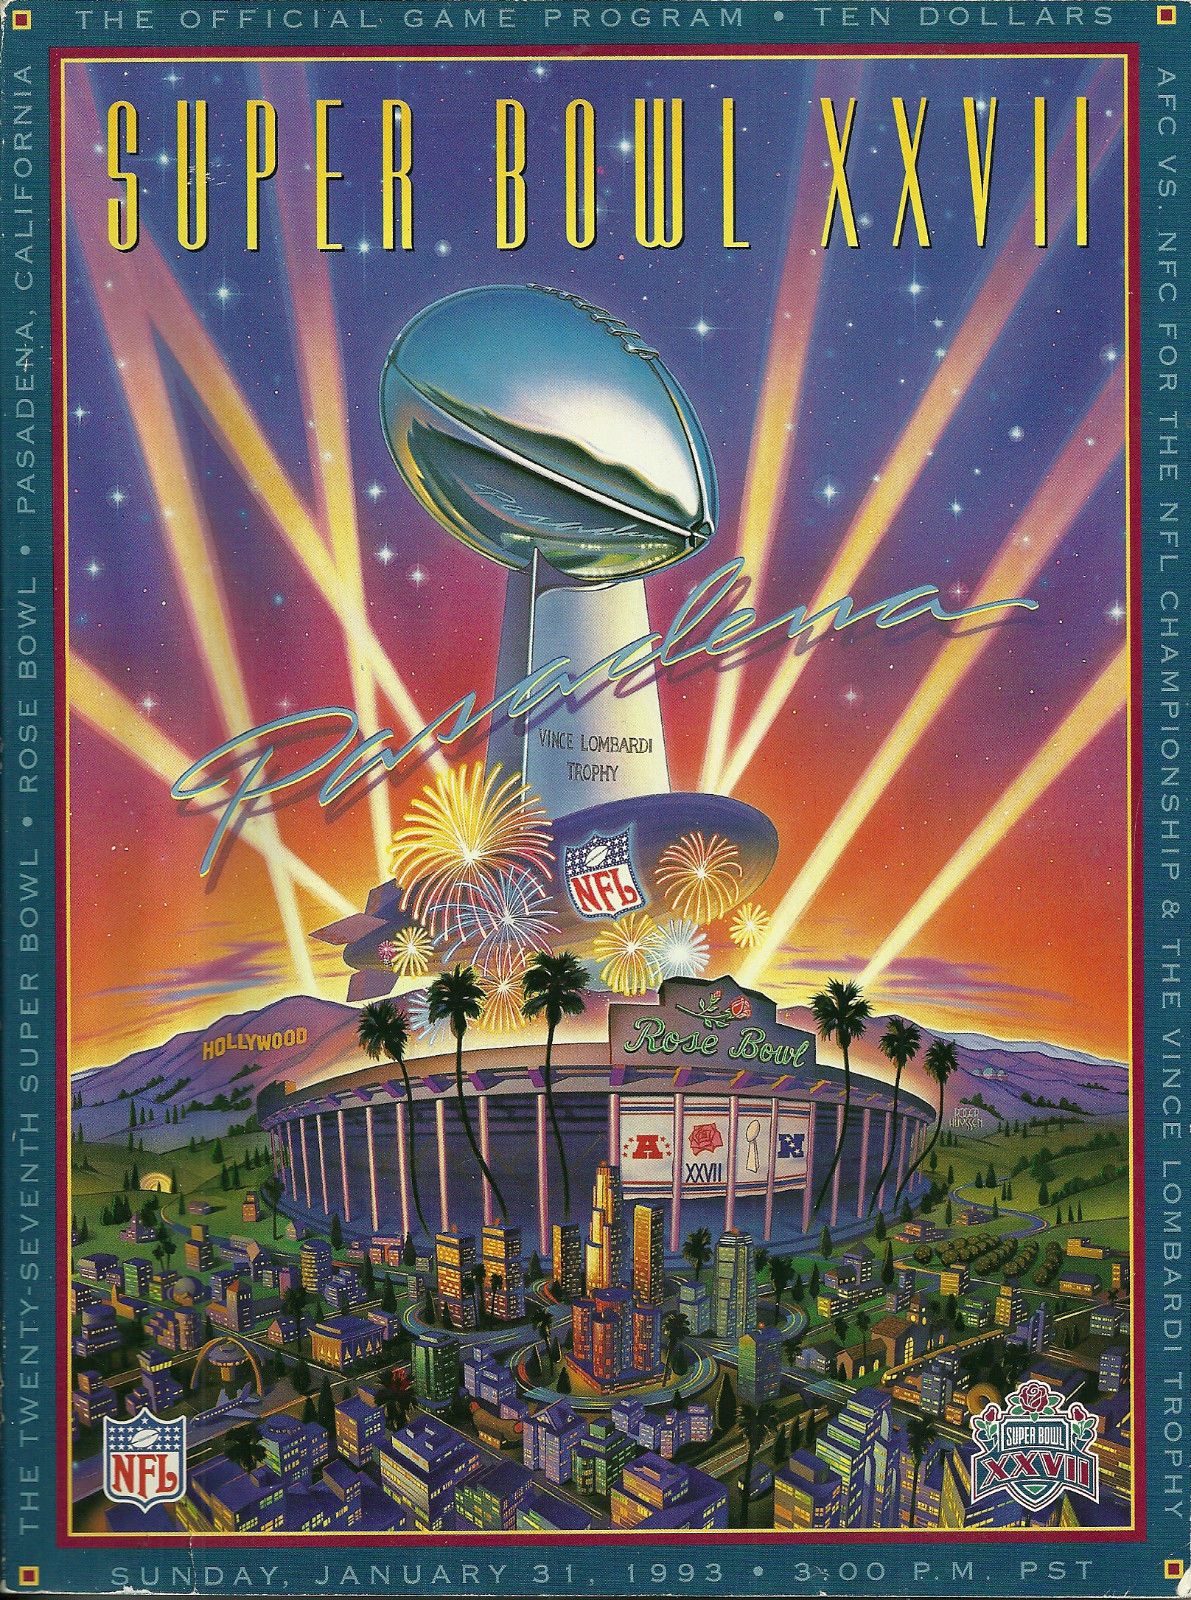 Super Bowl XXVII launched a dynasty in Dallas 2